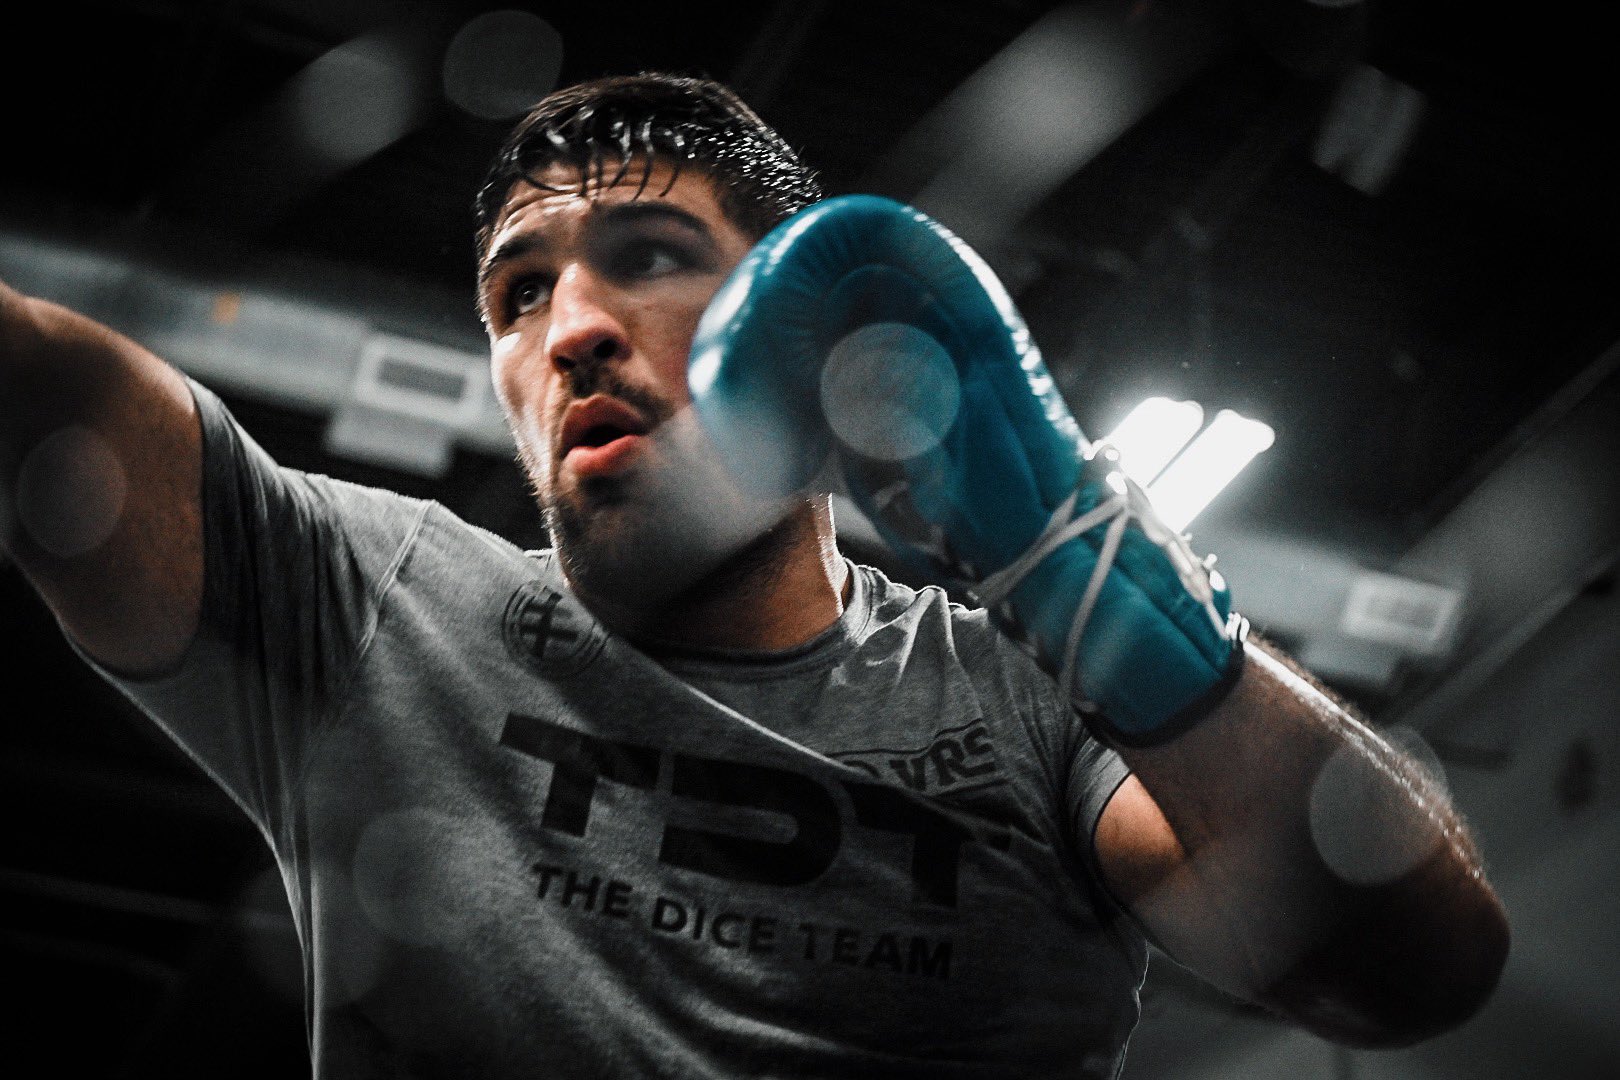 UFC Vegas 51: Vicente Luque vs Belal Muhammad, Check out the full match card